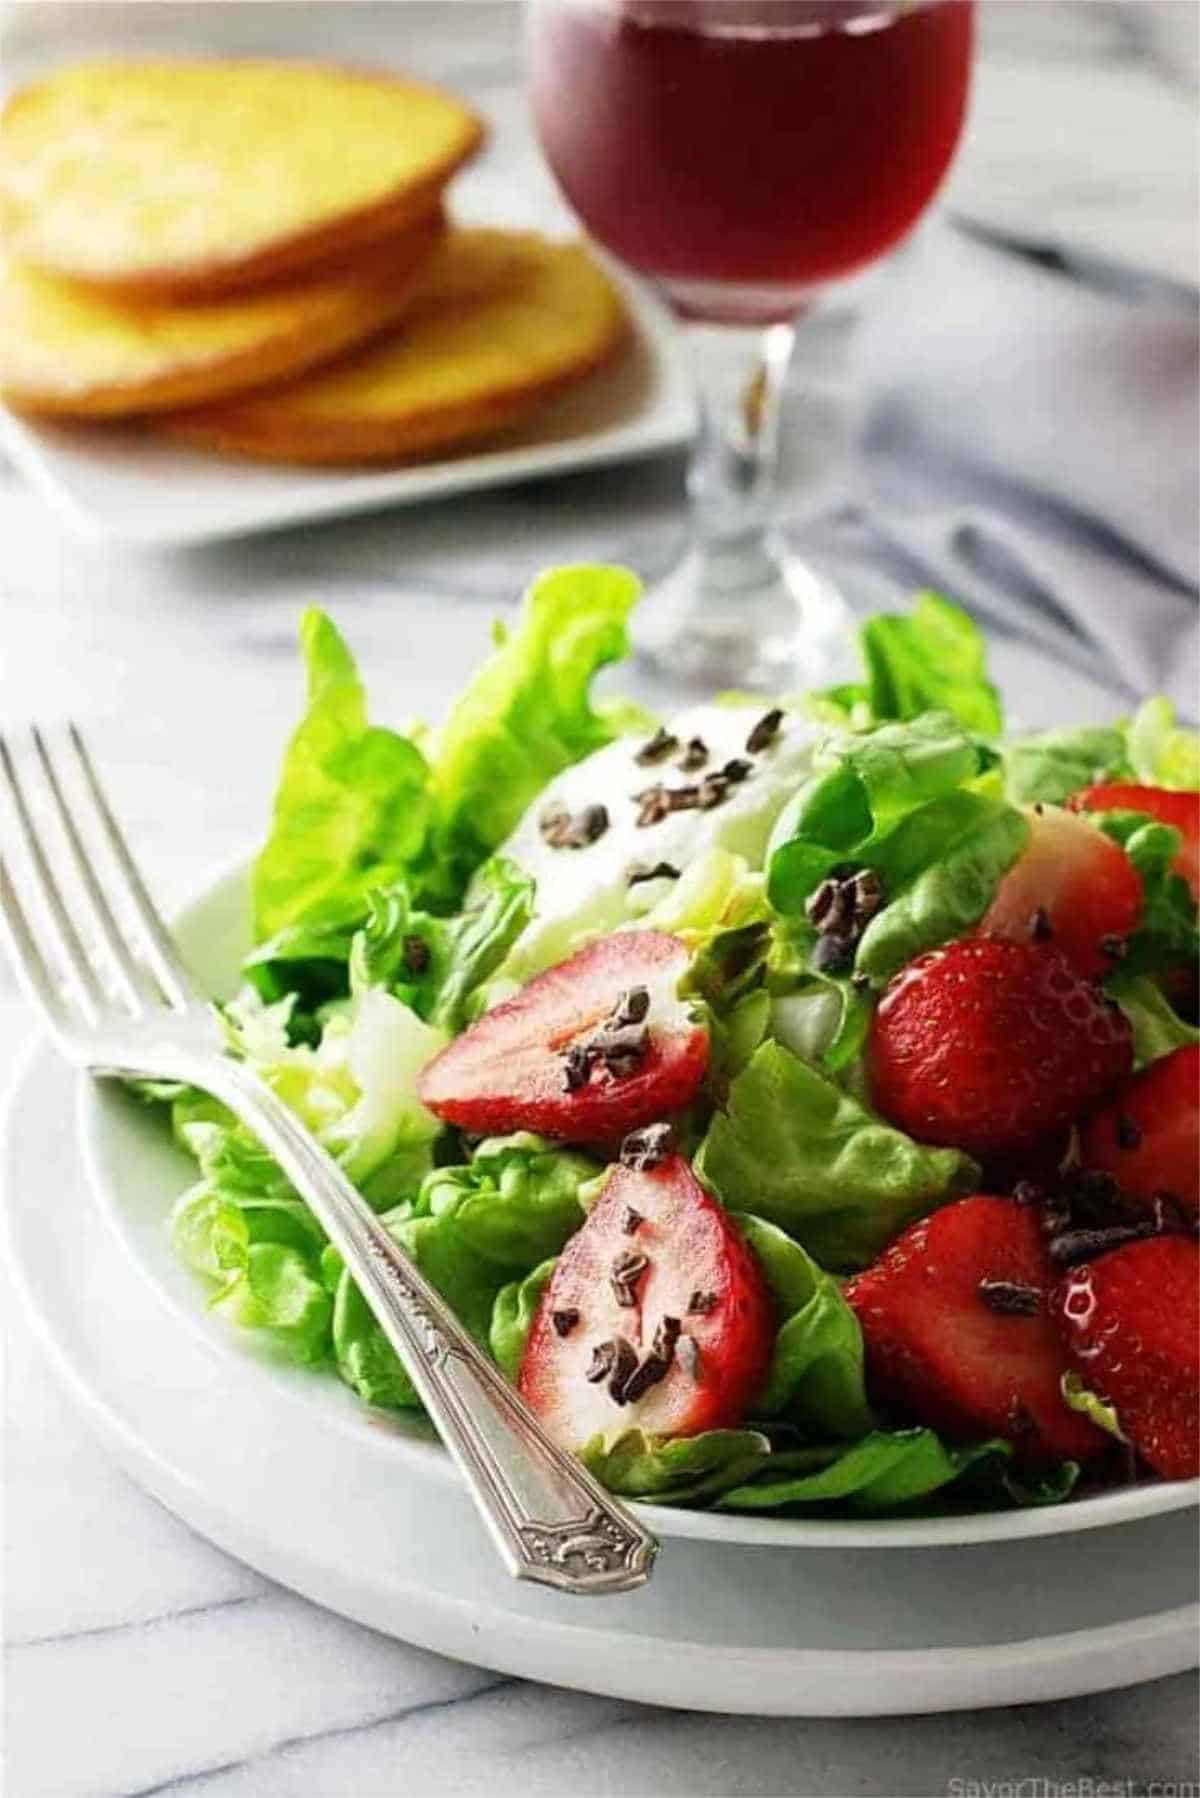 butter lettuce and strawberries salad.